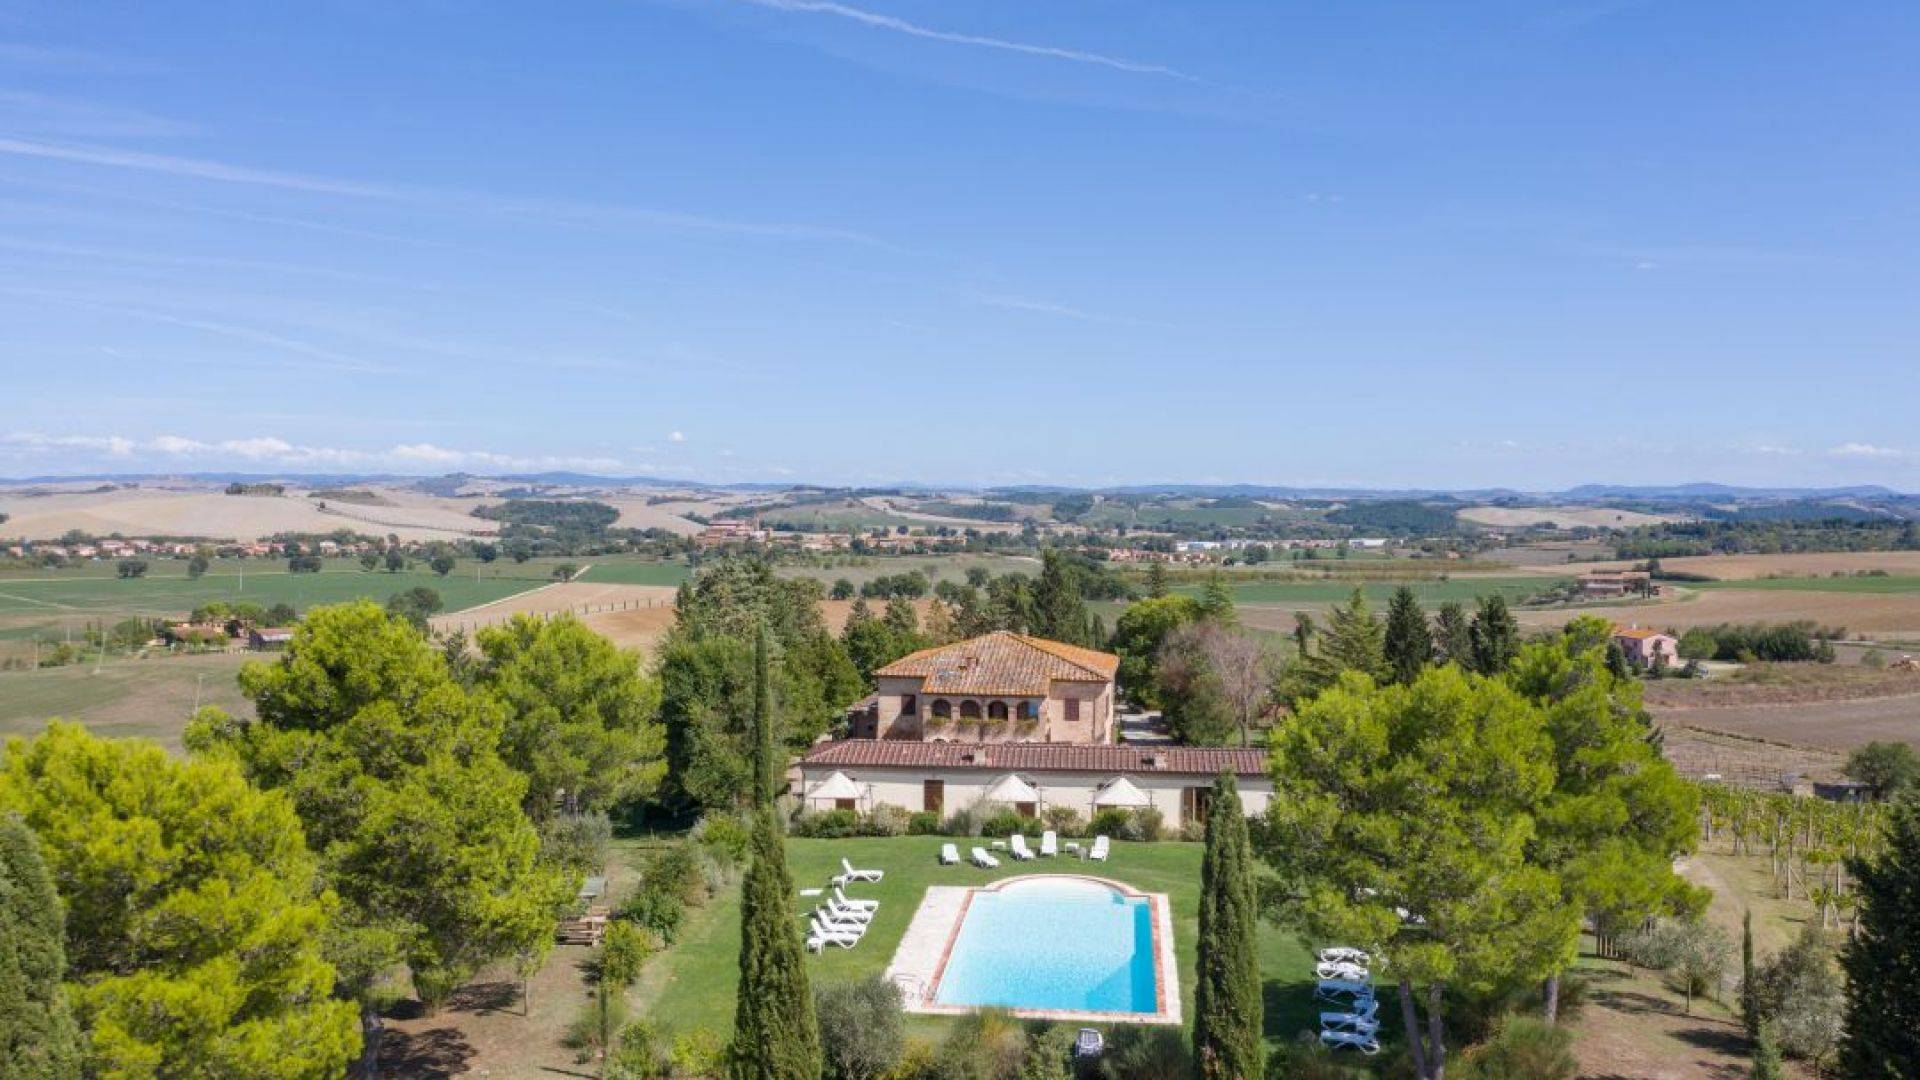 Magnificent 16th-century country house perfectly restored with park, pool, vineyard and horse paddock near Siena.